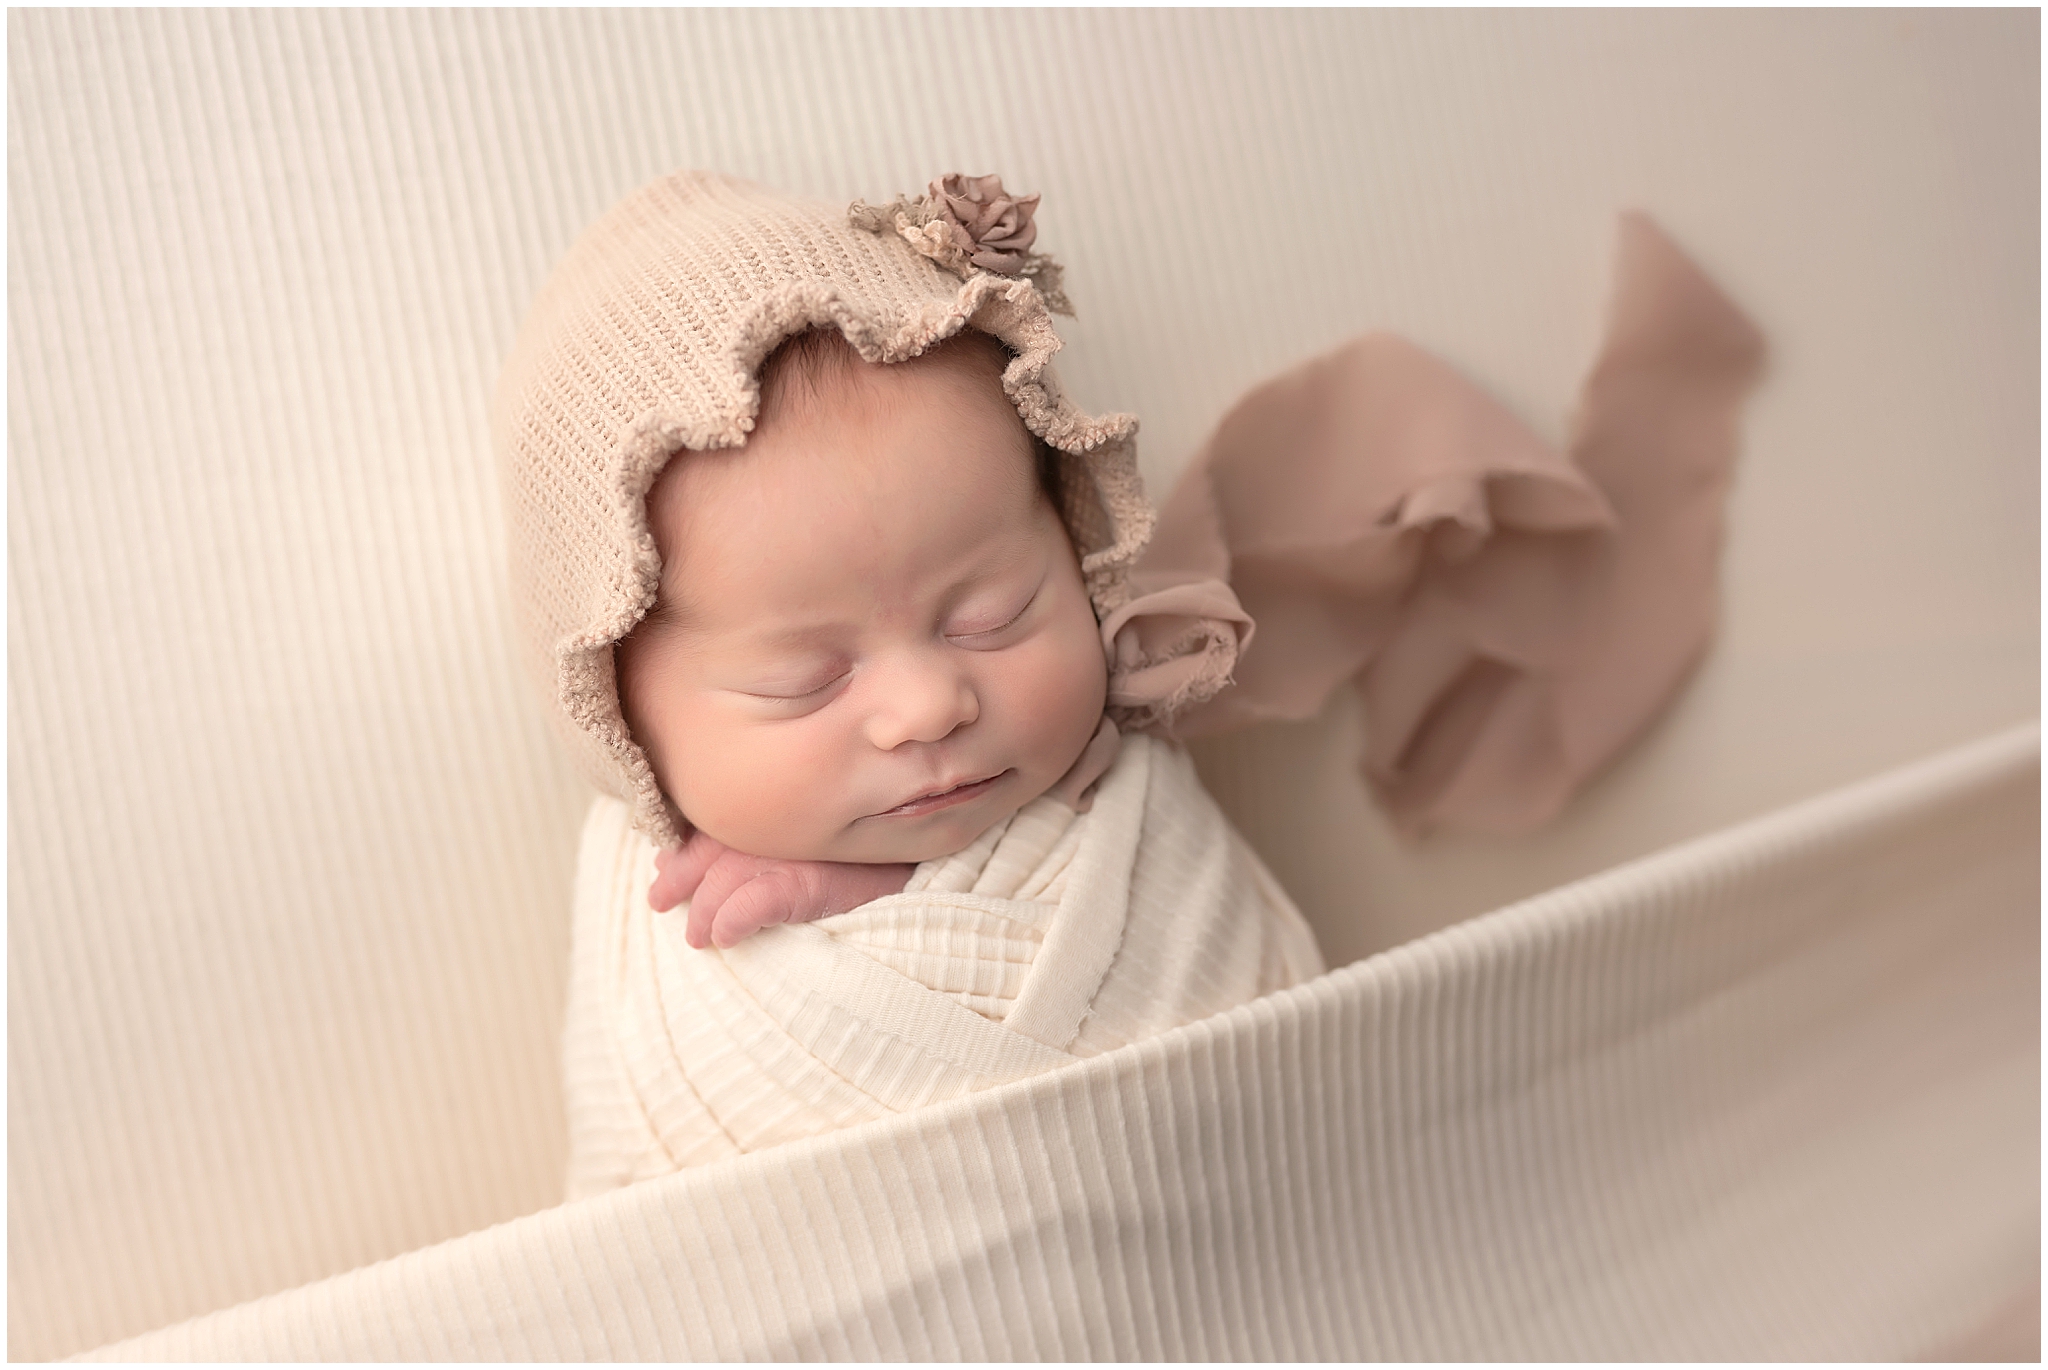 baby girl sleeping during newborn session at photography studio in london ontario